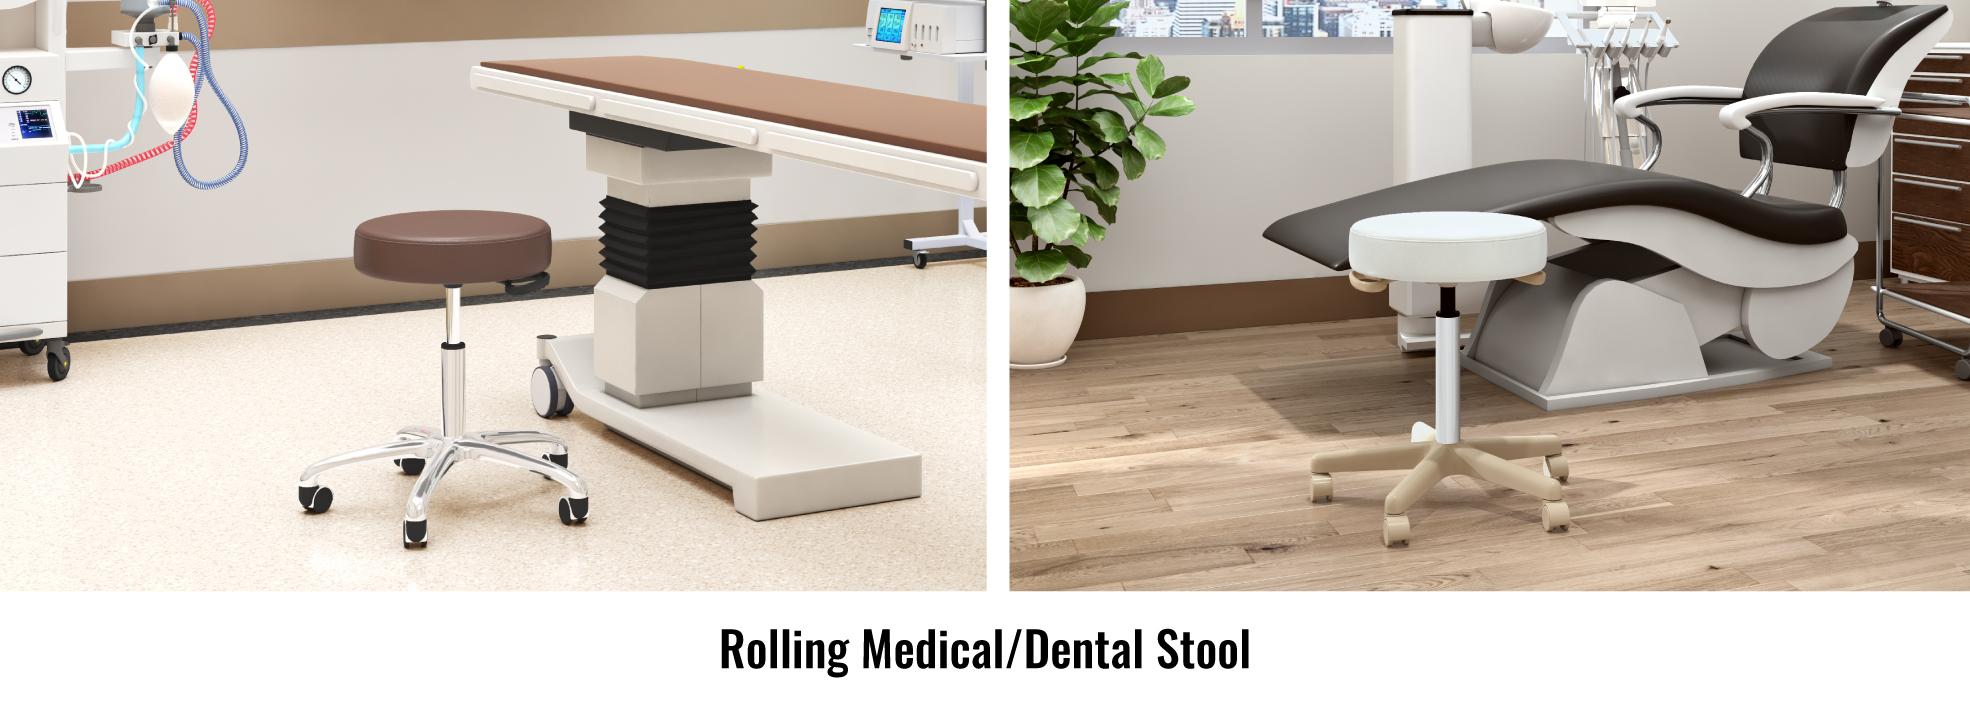 Rolling medical or dental stool shown in brown and white